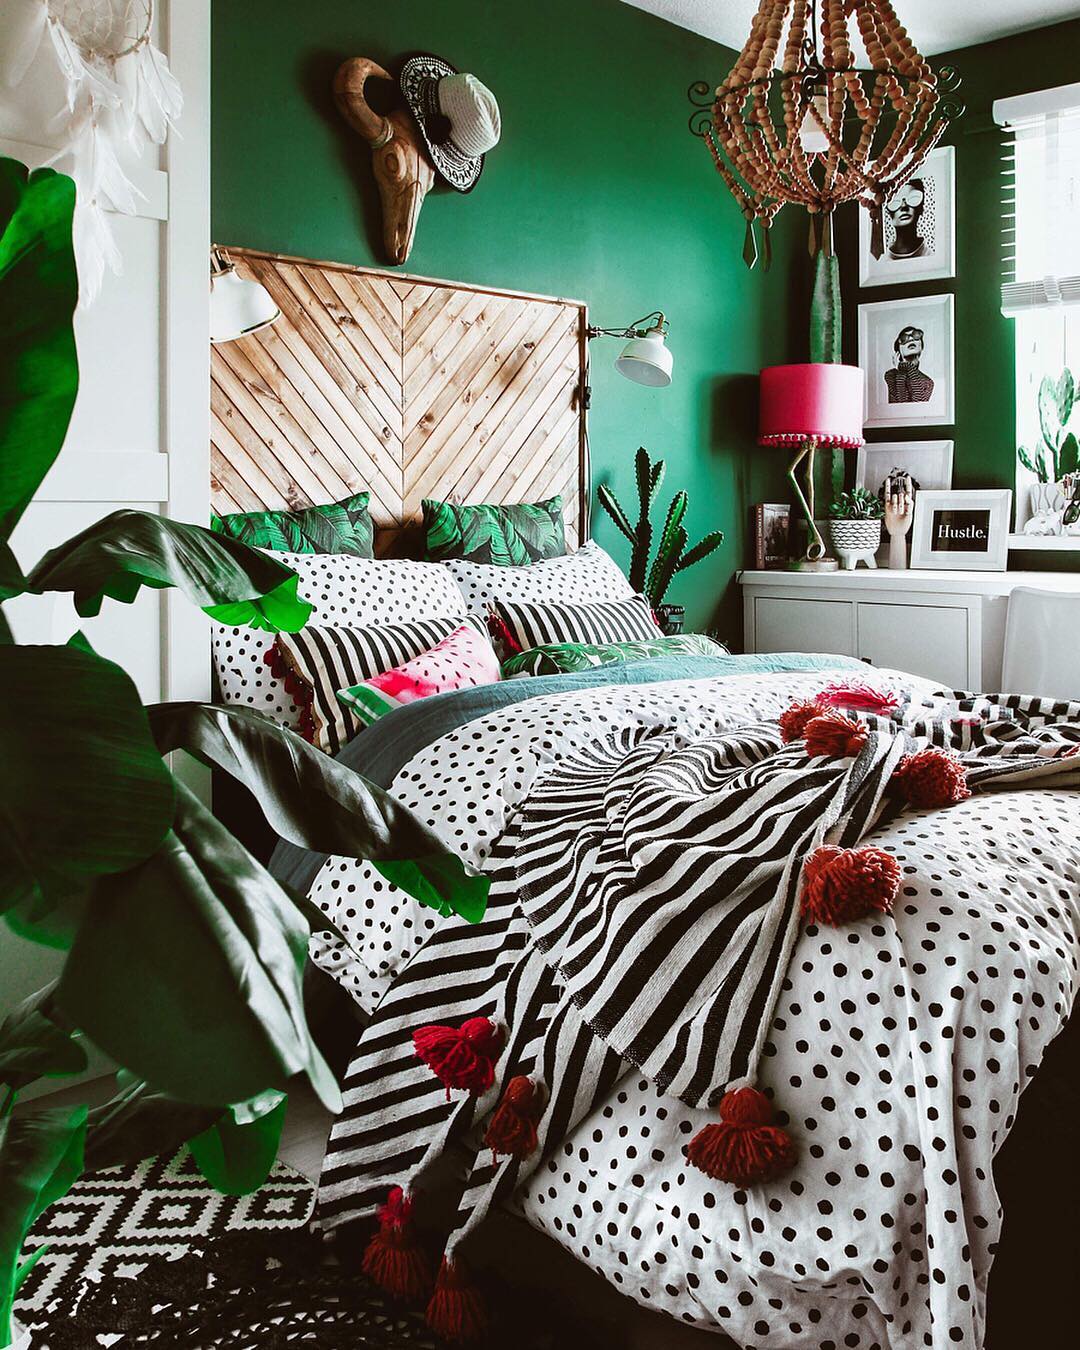 We’re in LOVE with Pati’s rich green wall